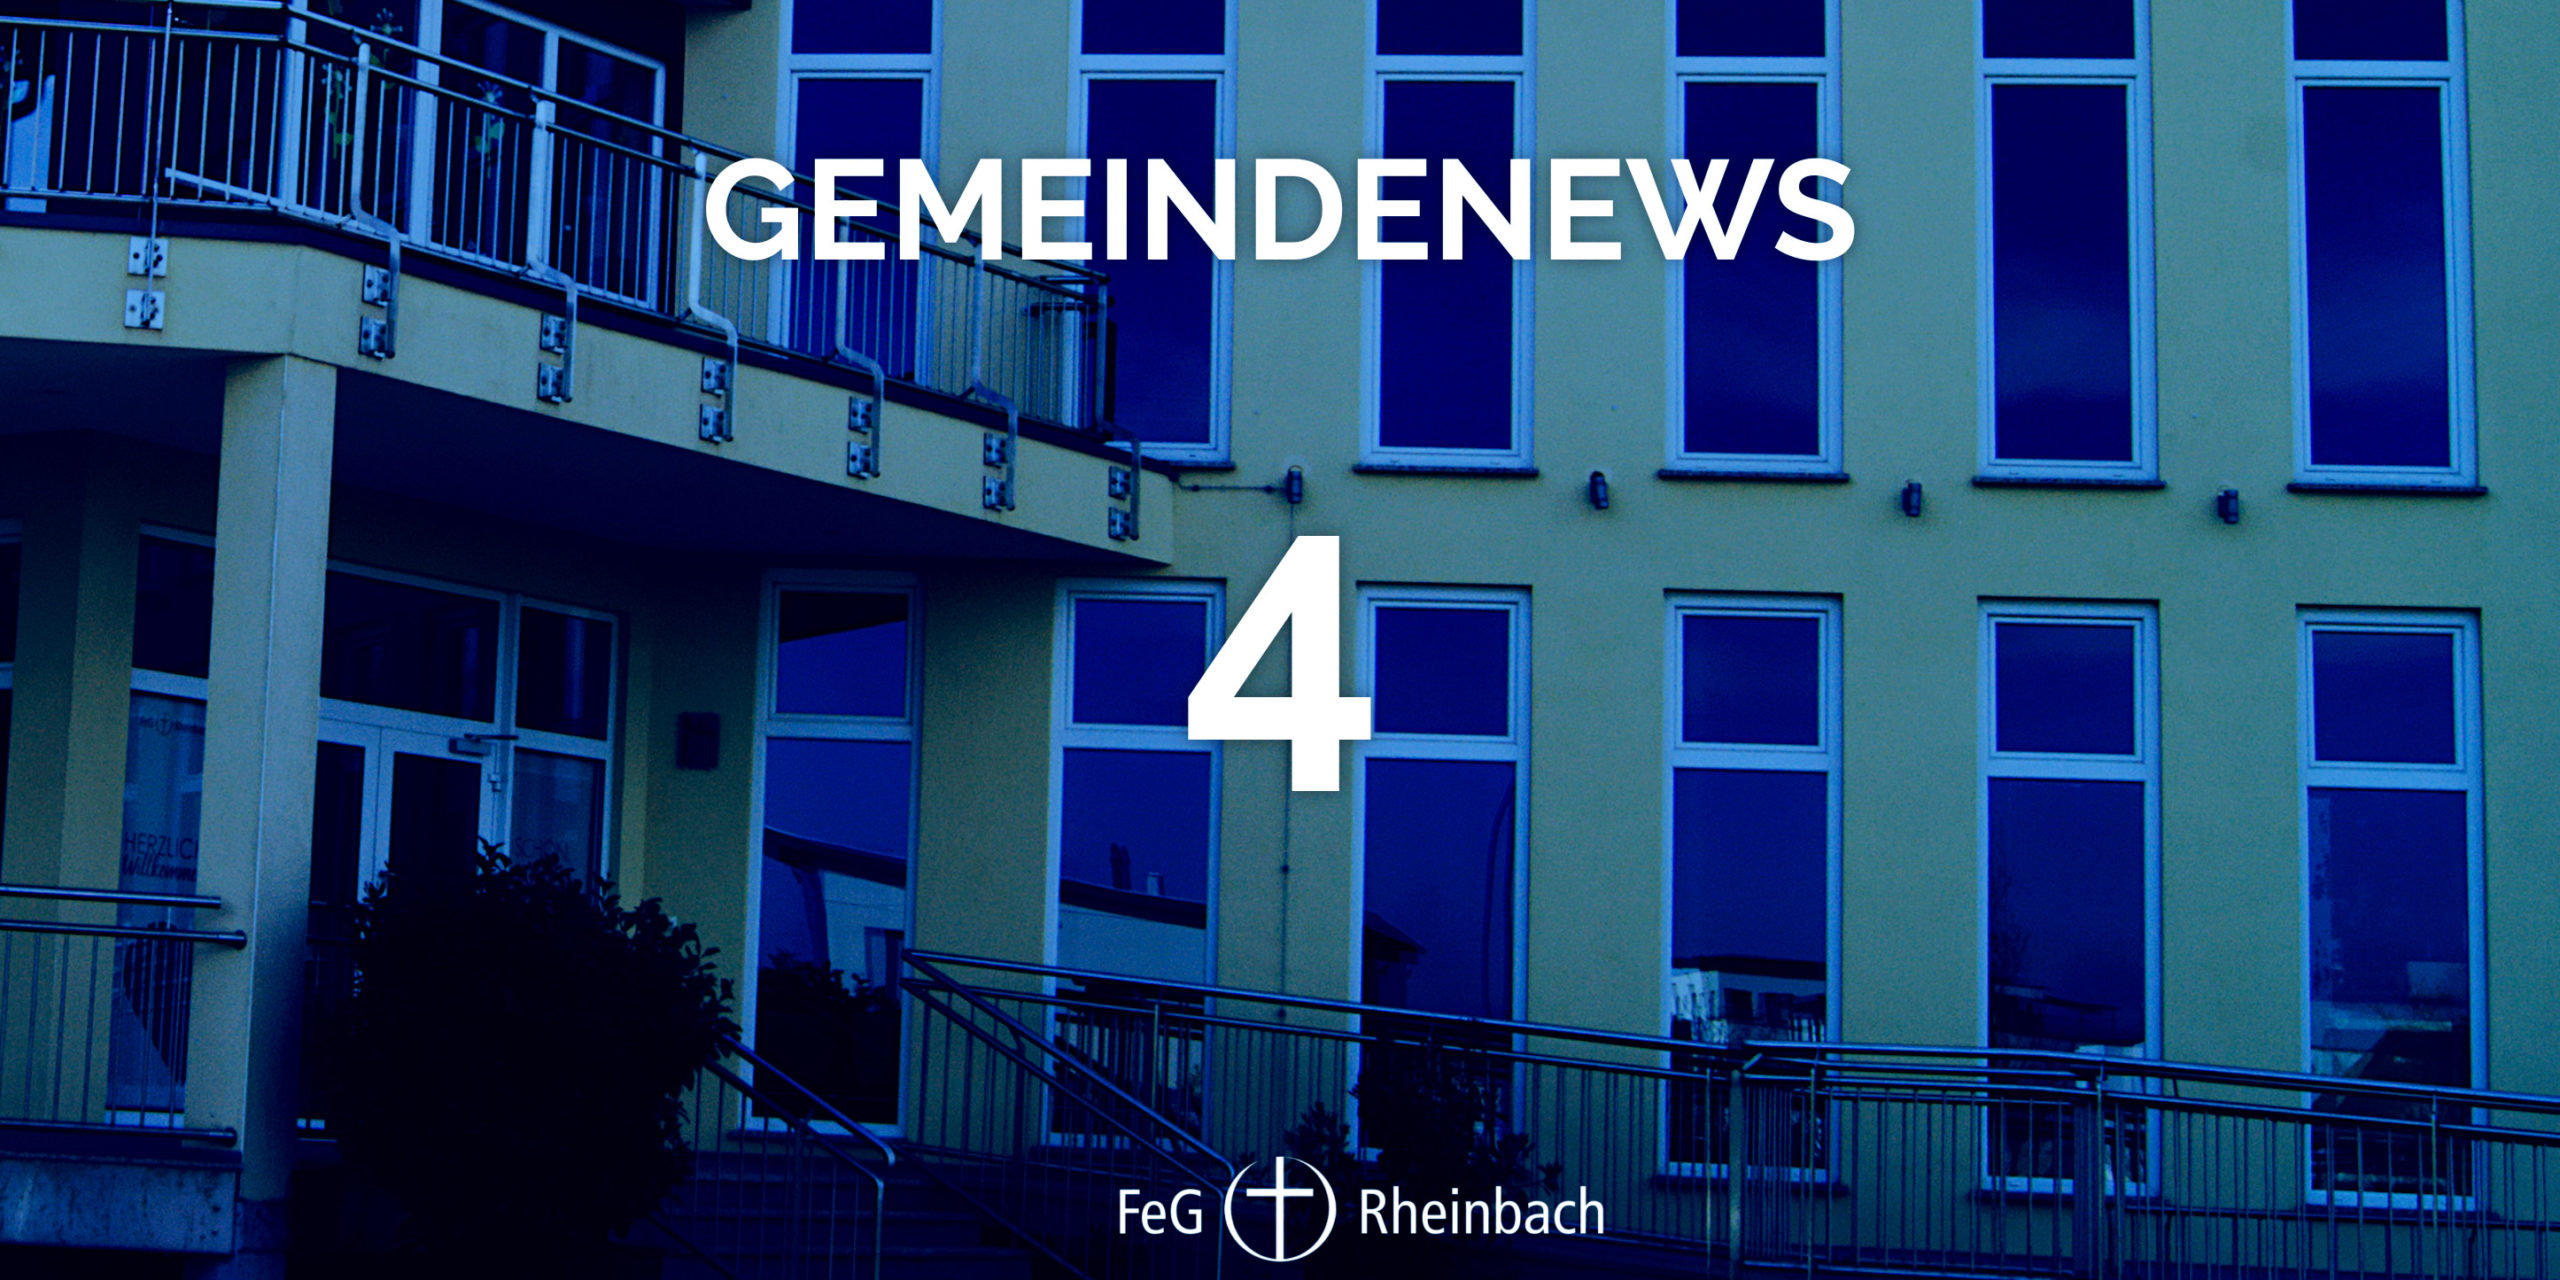 You are currently viewing Gemeindenews 4